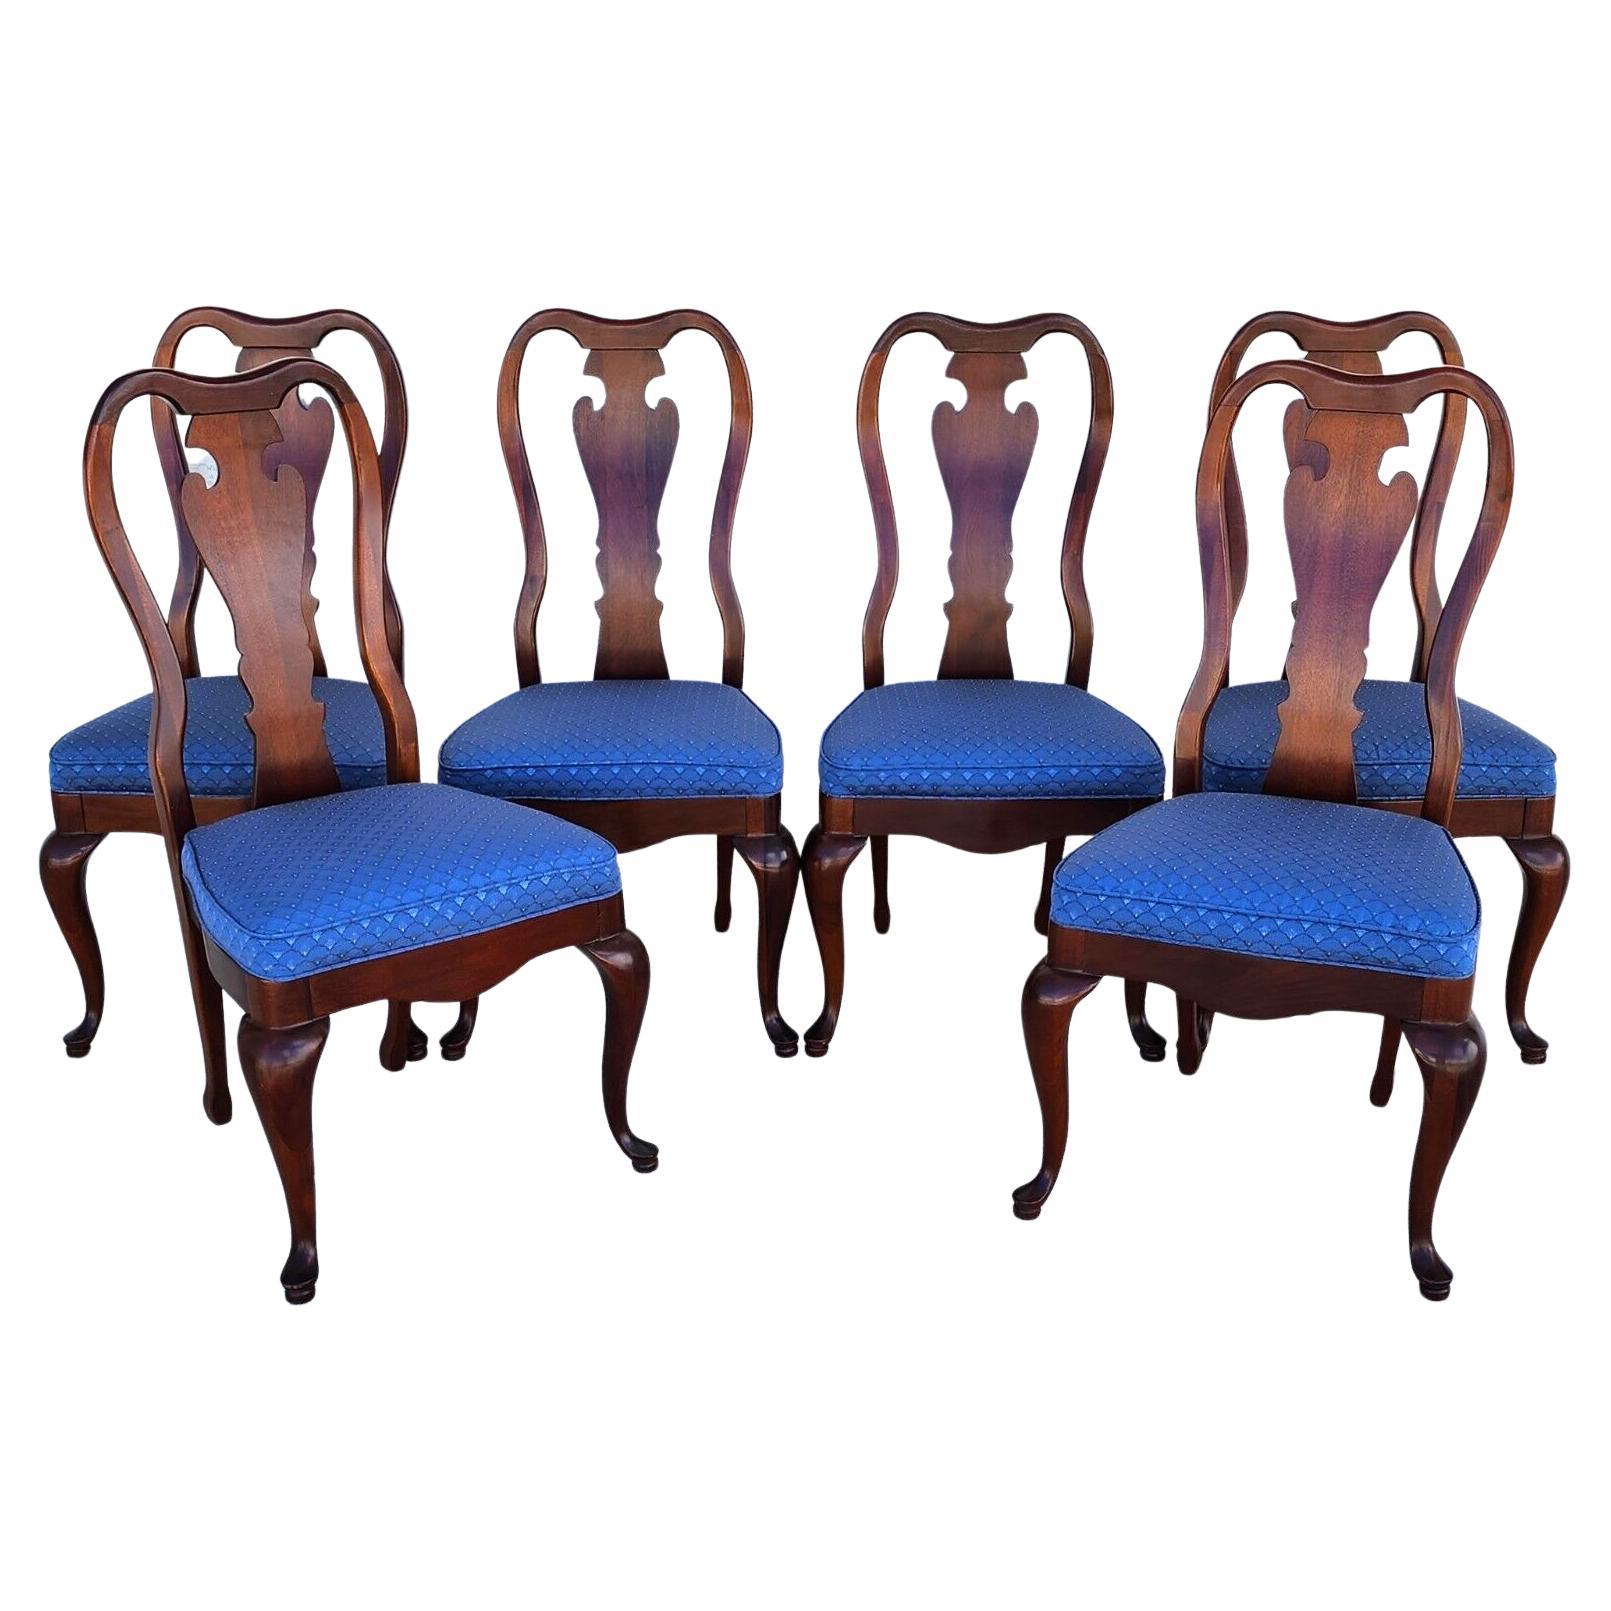 Vintage Queen Anne Dining Chairs Mahogany Set of 6